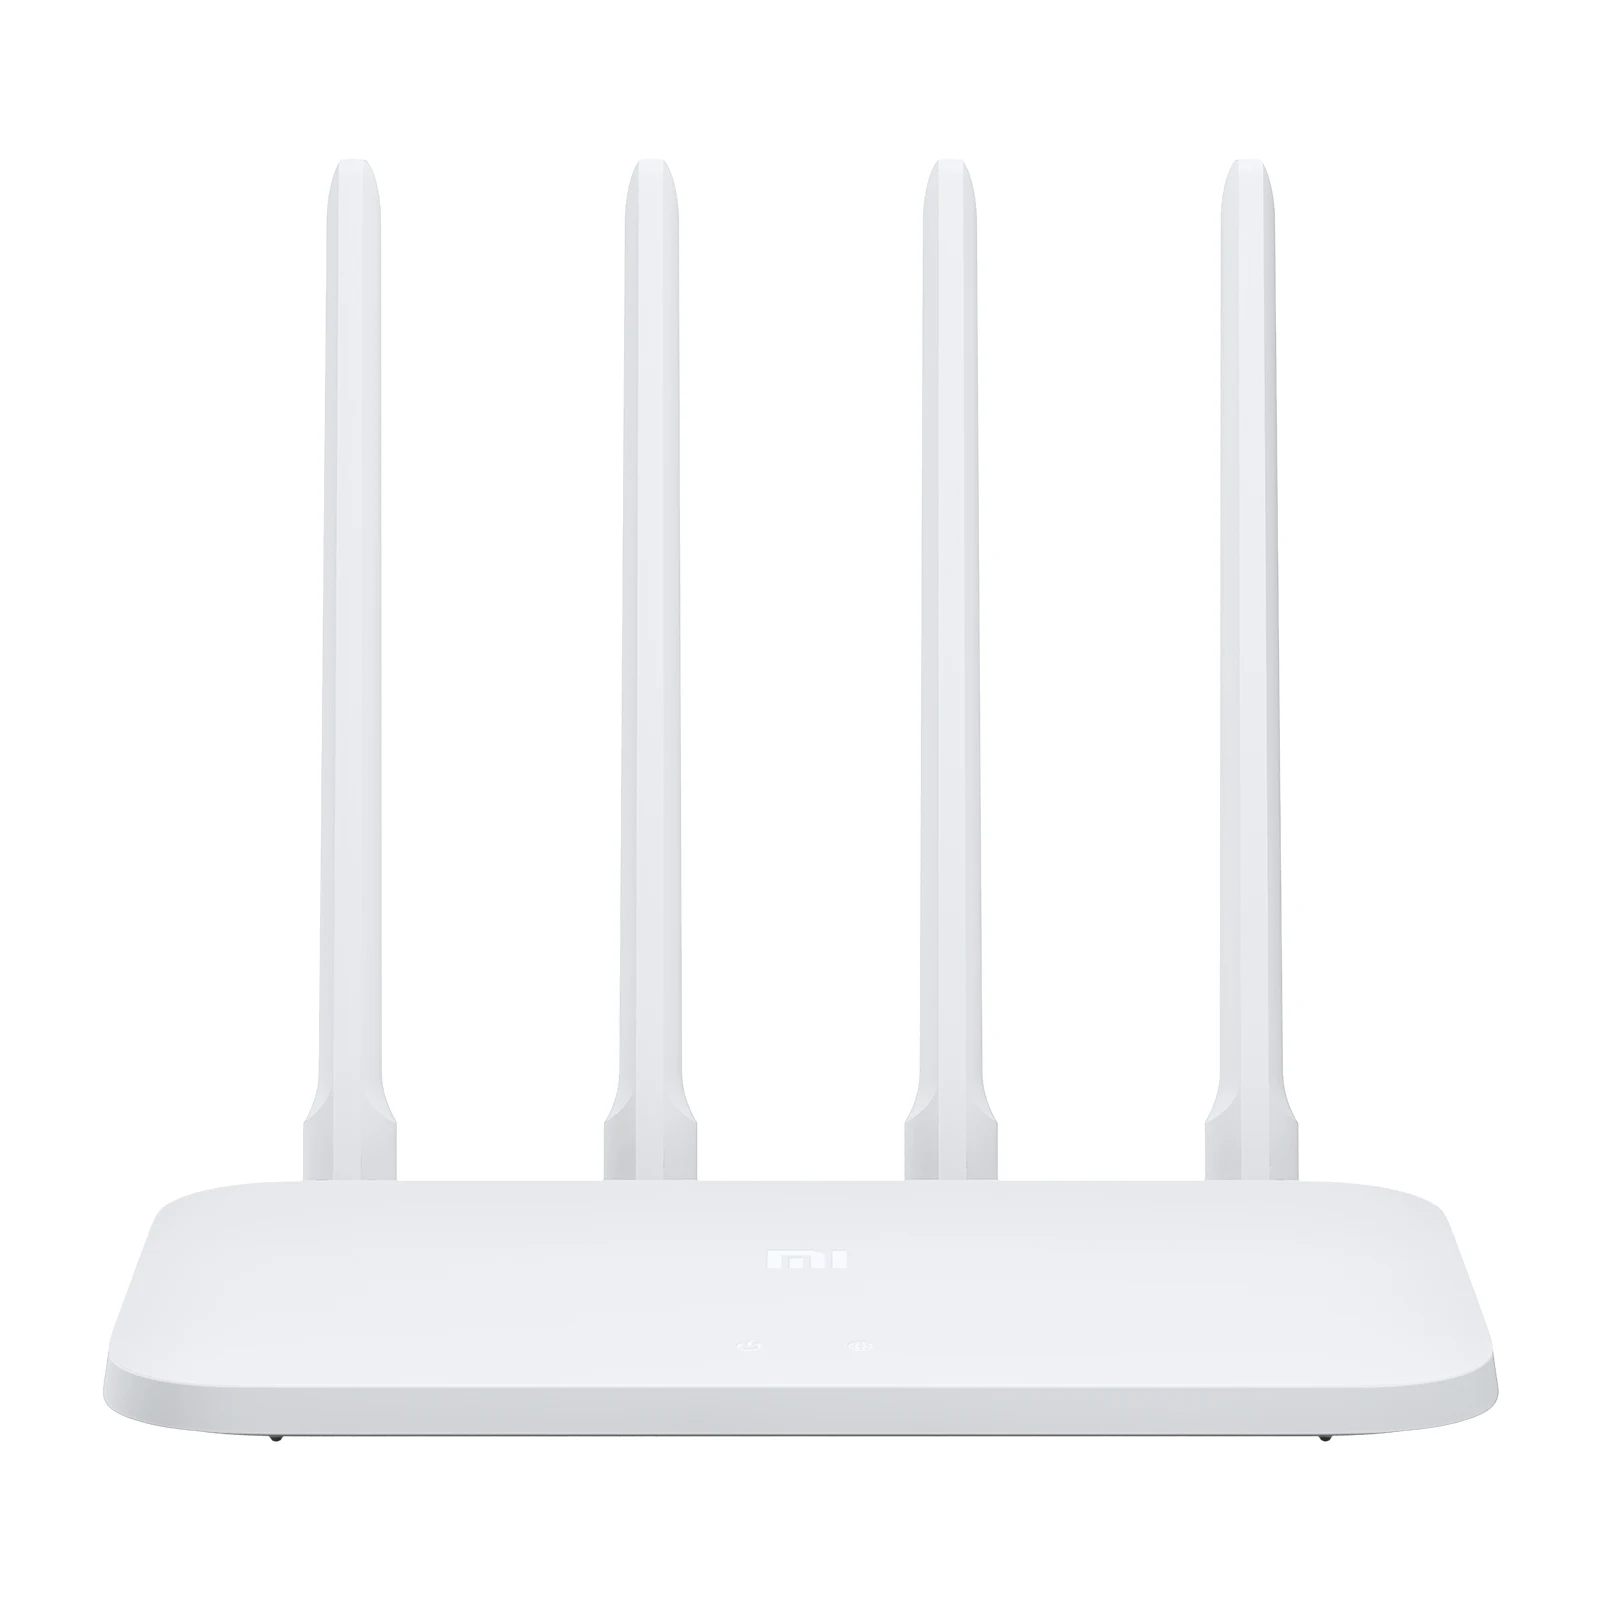 Original Xiaomi Mi WIFI Router 4C Roteador APP Control 64 RAM 802.11 b/g/n 2.4G 300Mbps 4 Antennas Routers Repeater